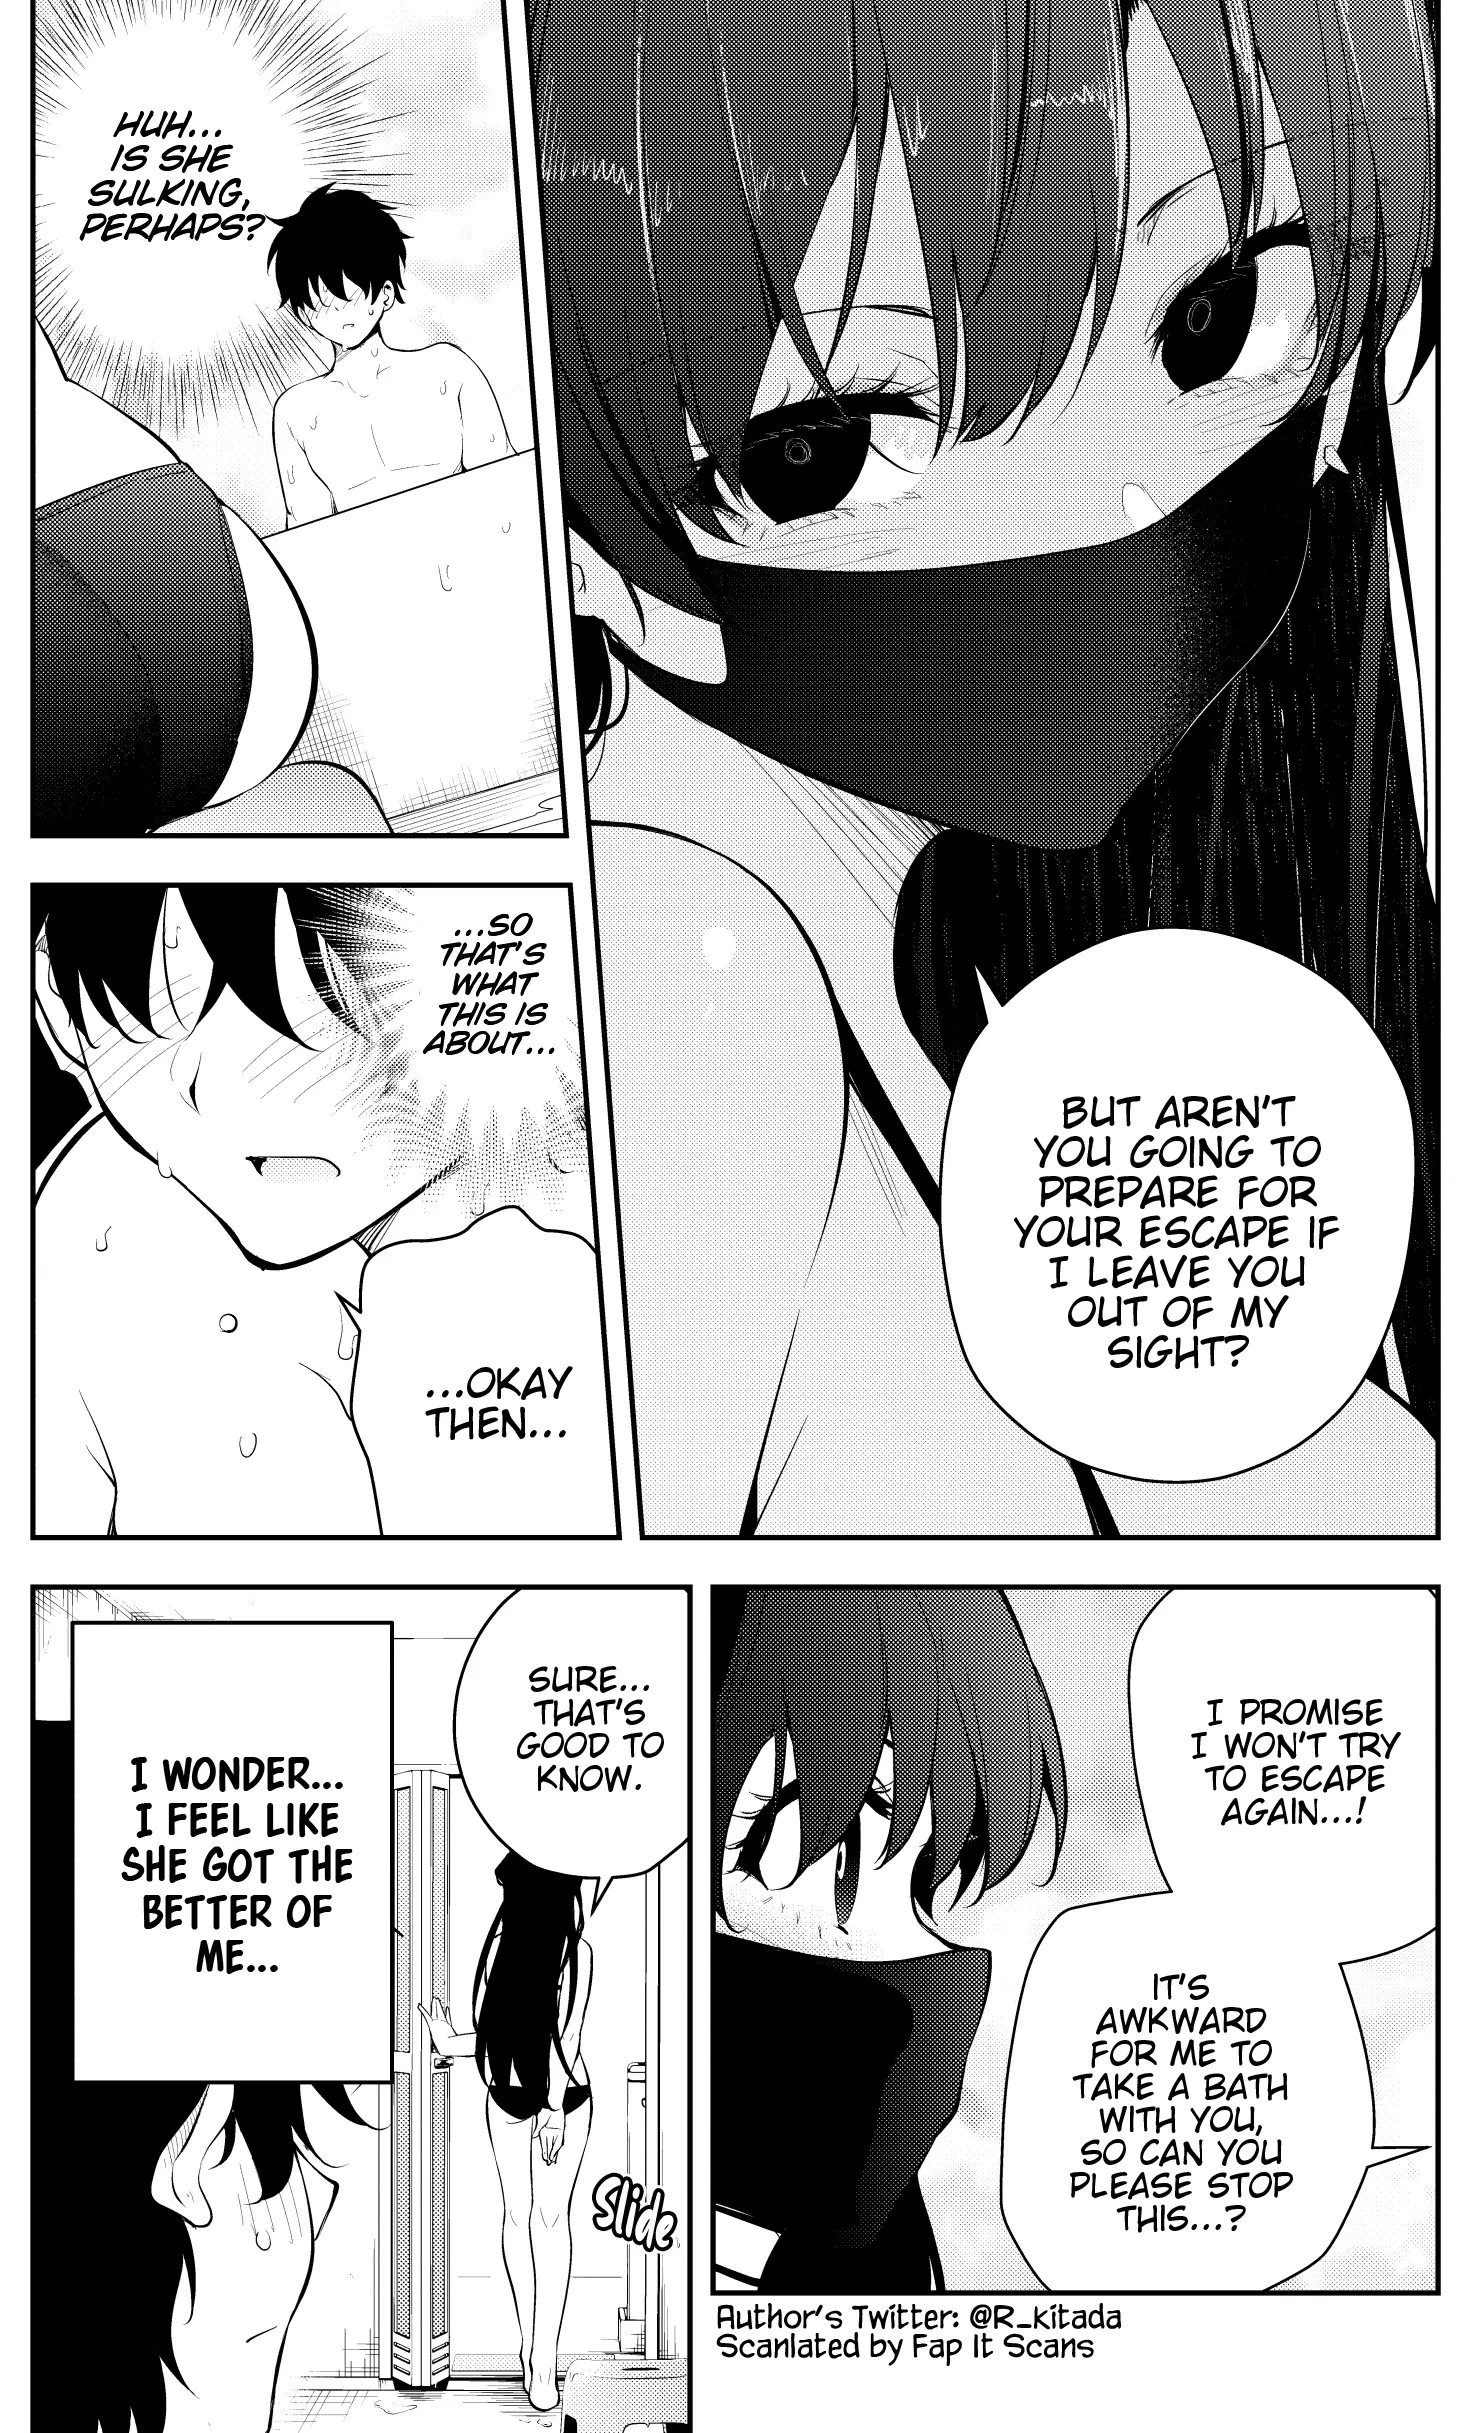 The Story Of A Manga Artist Confined By A Strange High School Girl - 17 page 4-6416e10a